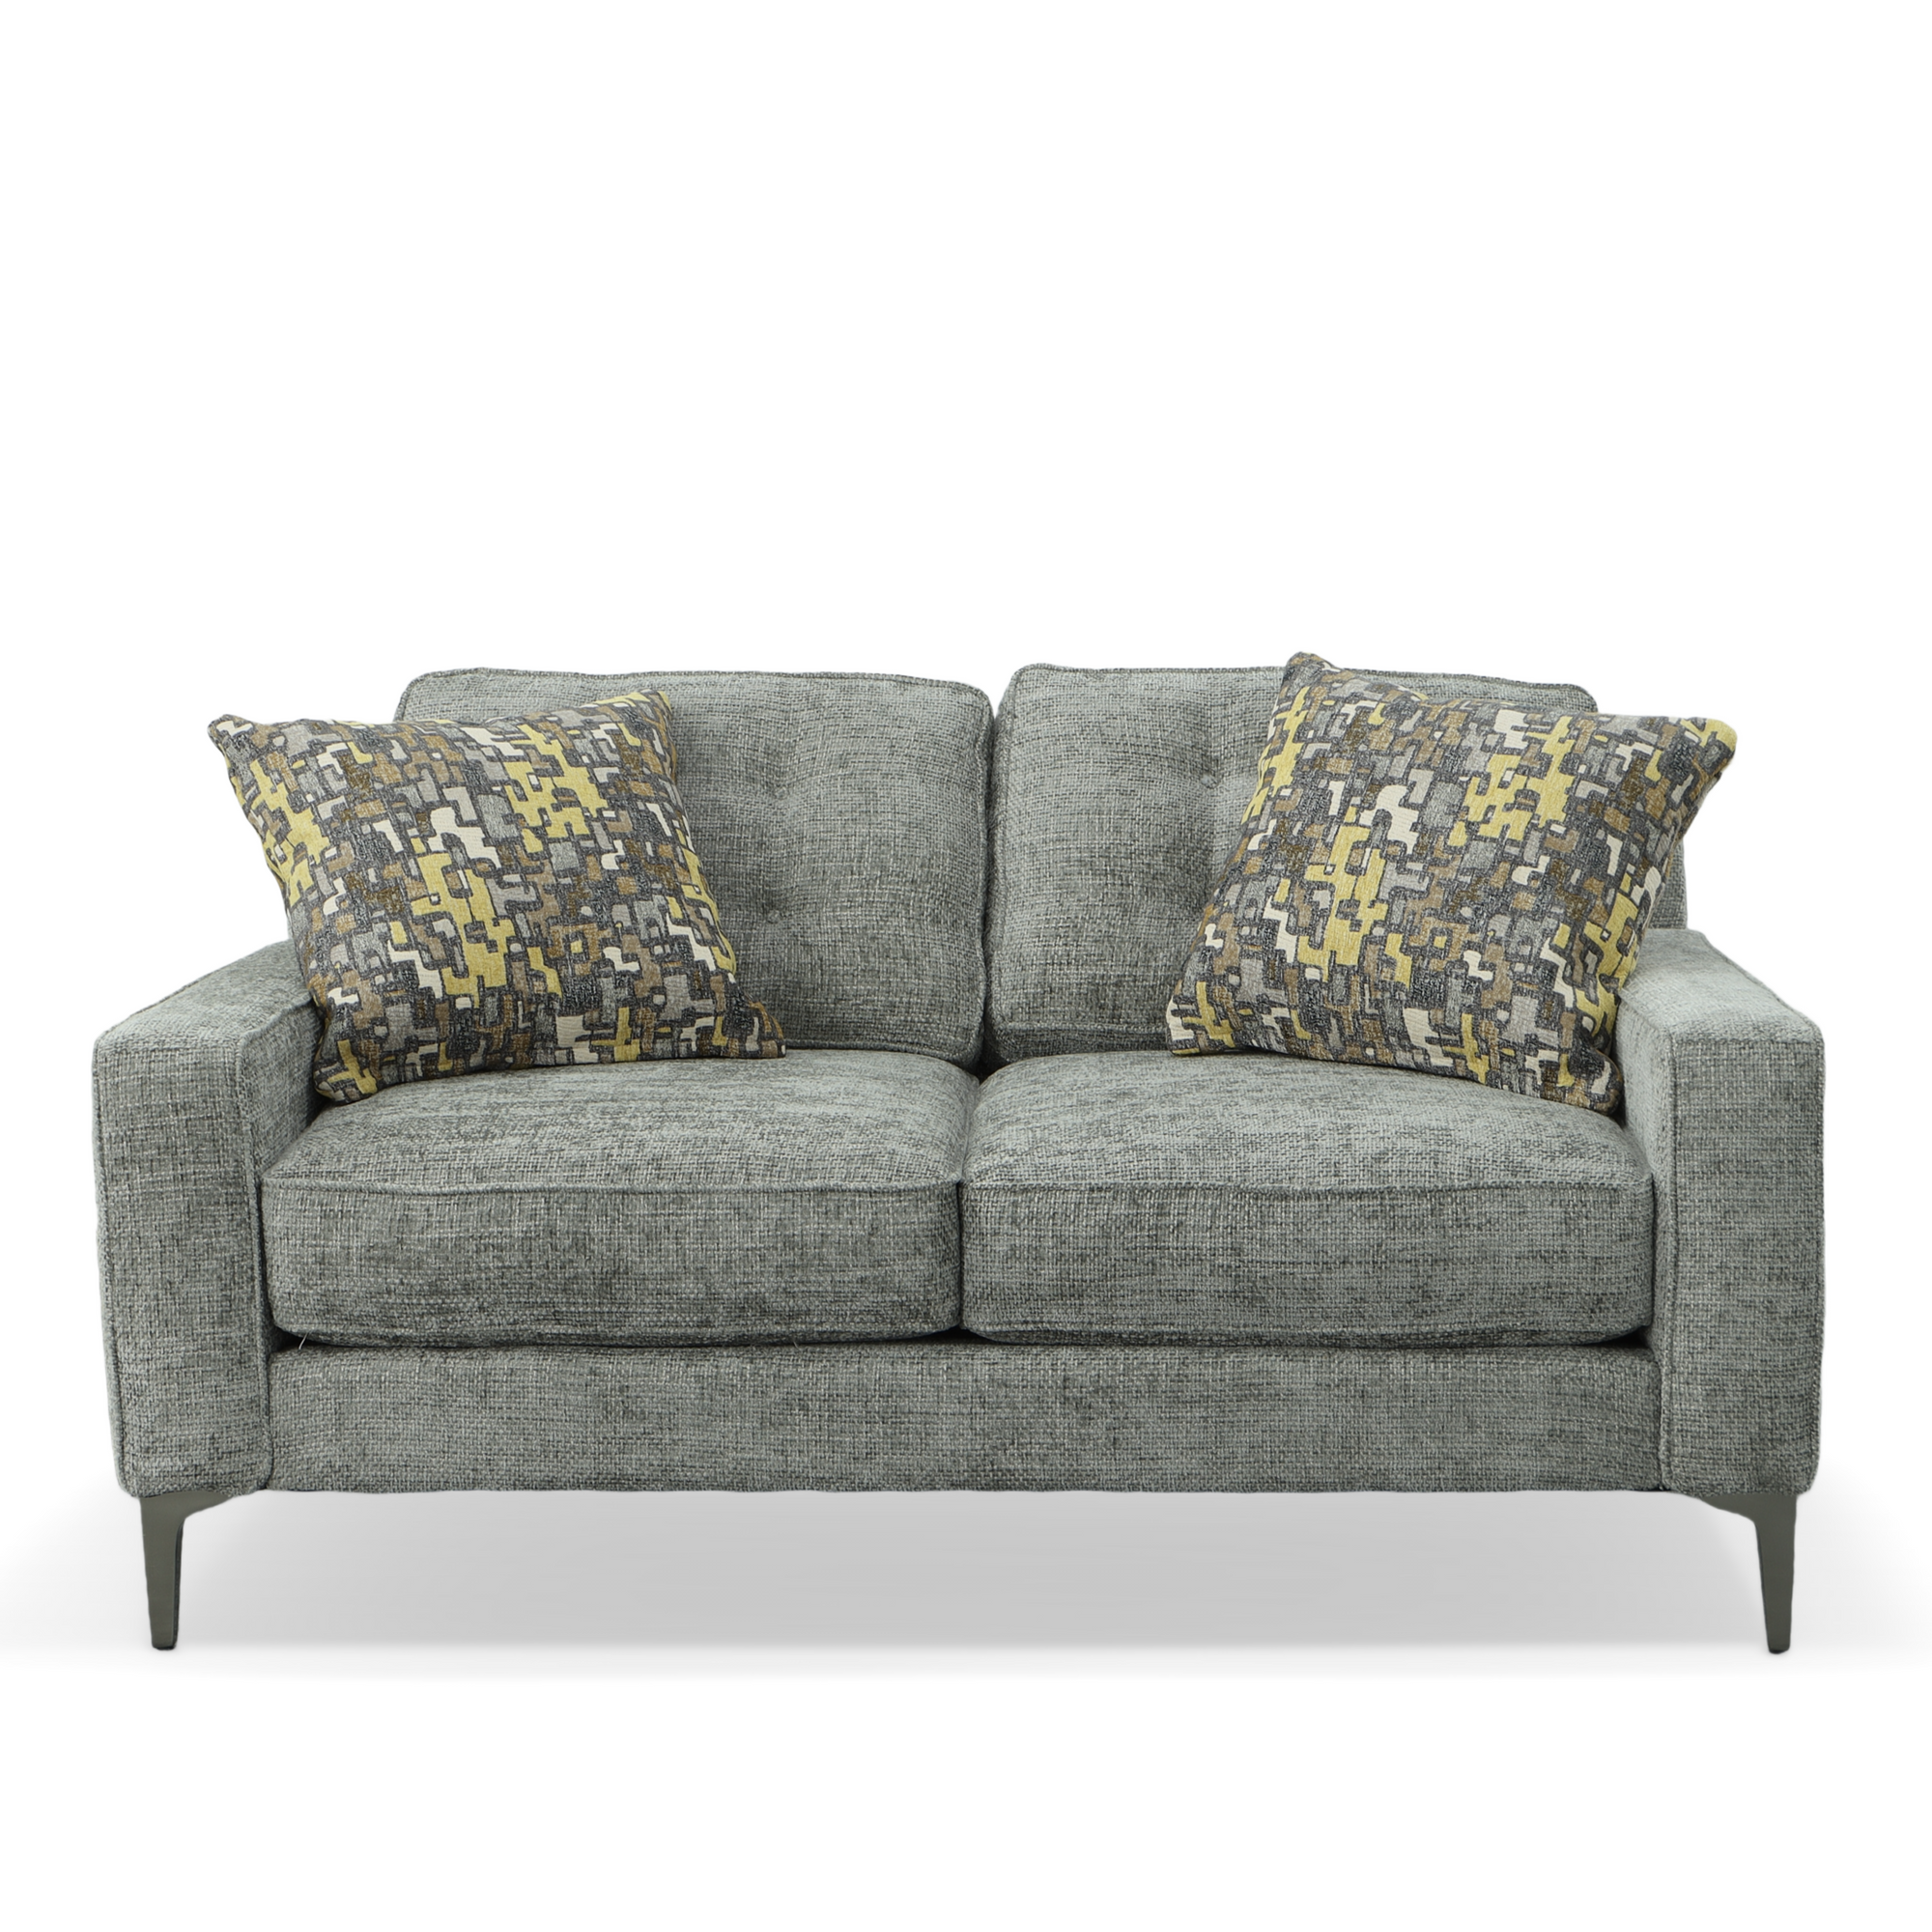 Phoebe Loveseat with two 21" Toss Pillows